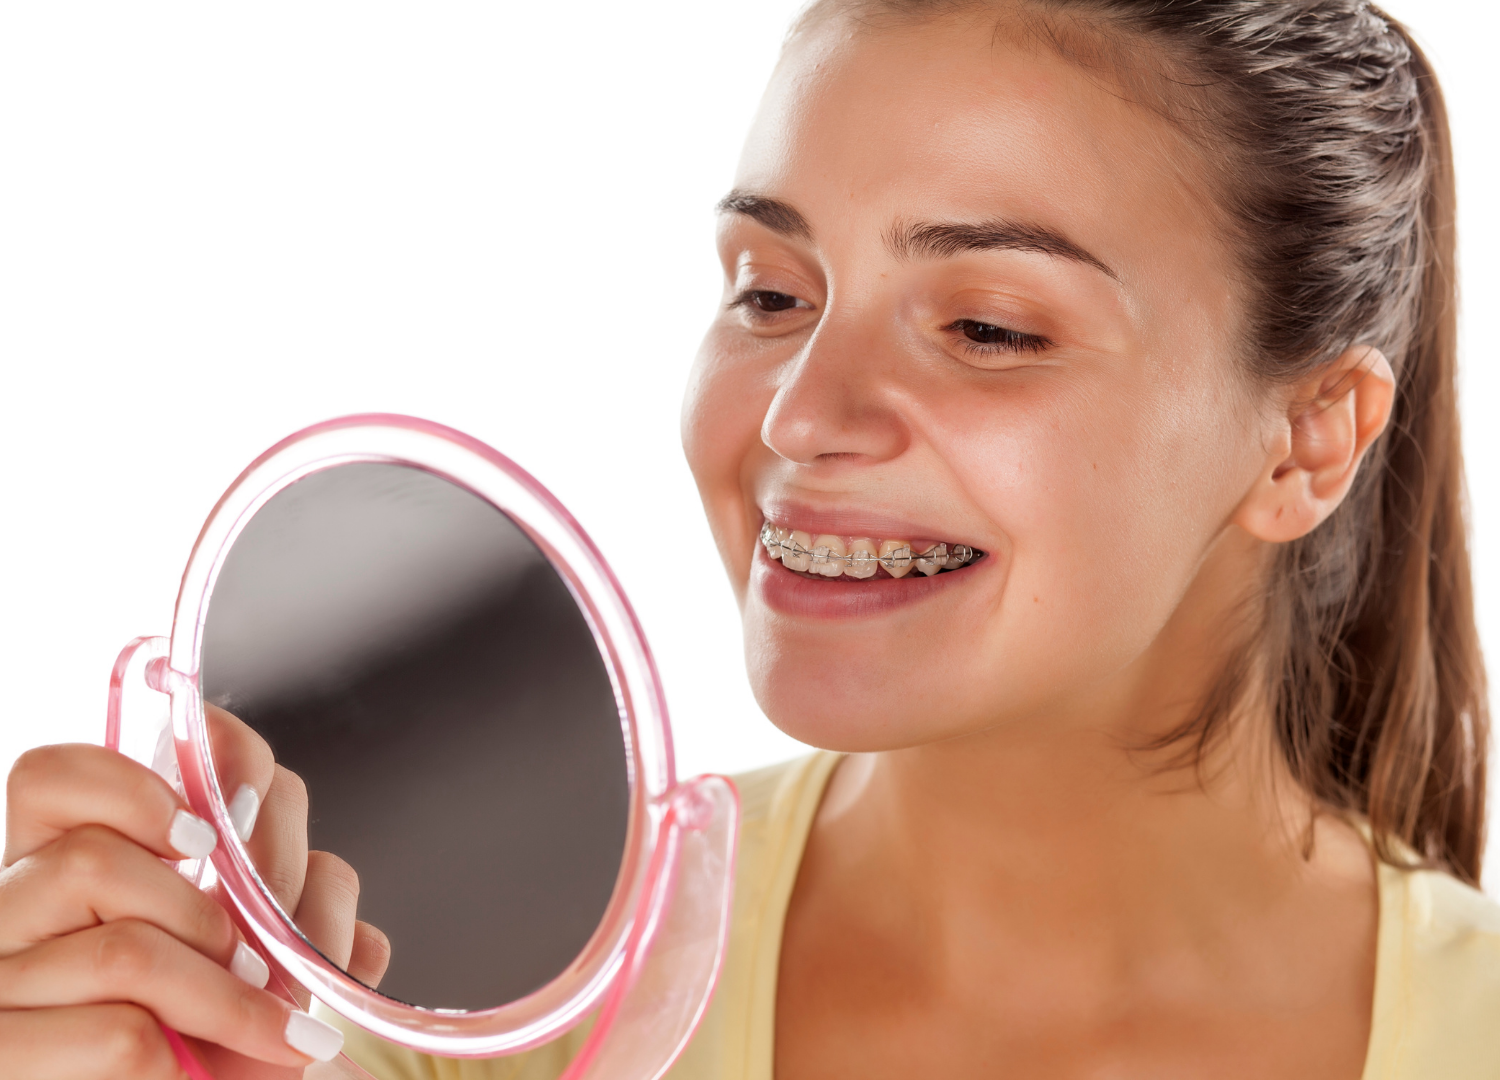 How to Keep Your Smile Looking Its Best During Orthodontic Treatment